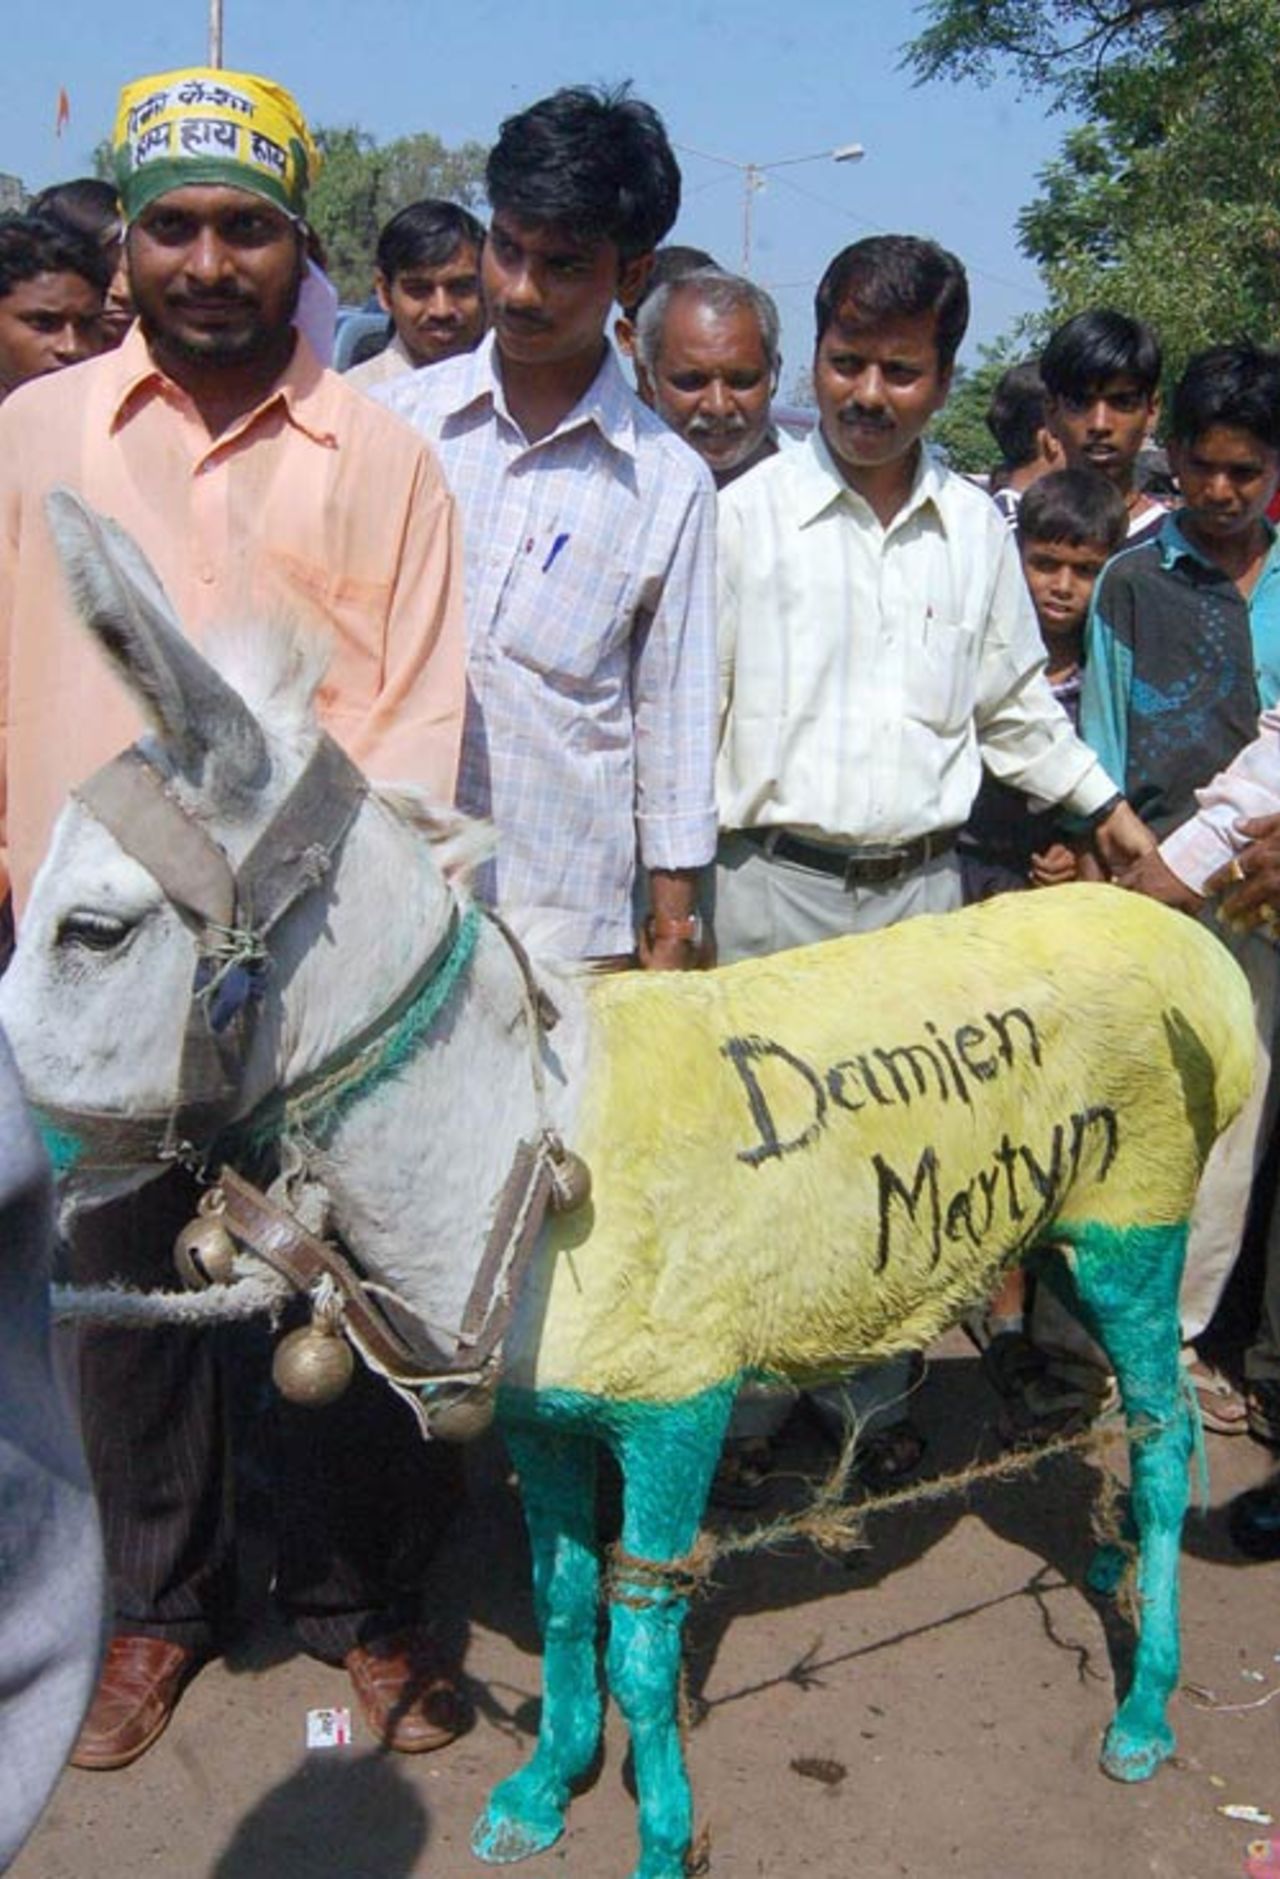 Indian supporters surround a donkey to register their displeasure at Australia's reported behaviour in the ICC Trophy final presentation, Mumbai, November 7 2006